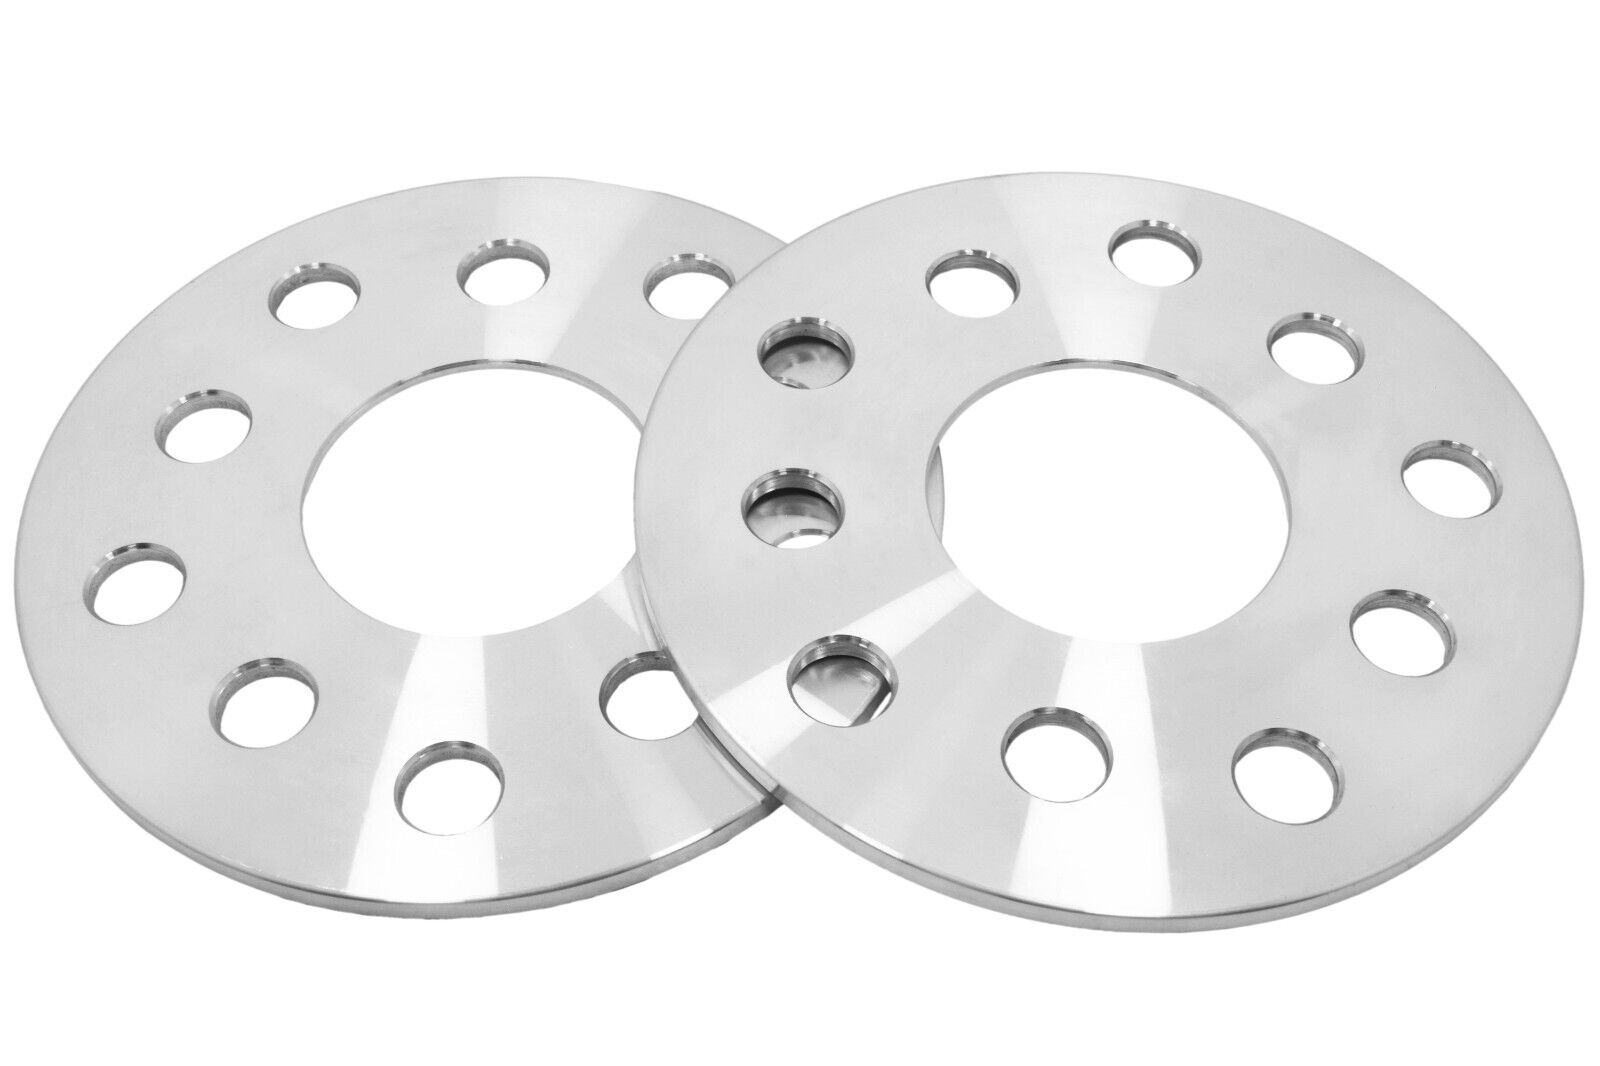 2pc 5mm 5x100 5x112 Audi Volkswagen Wheel Spacers ONLY Fits A4 Golf GTI